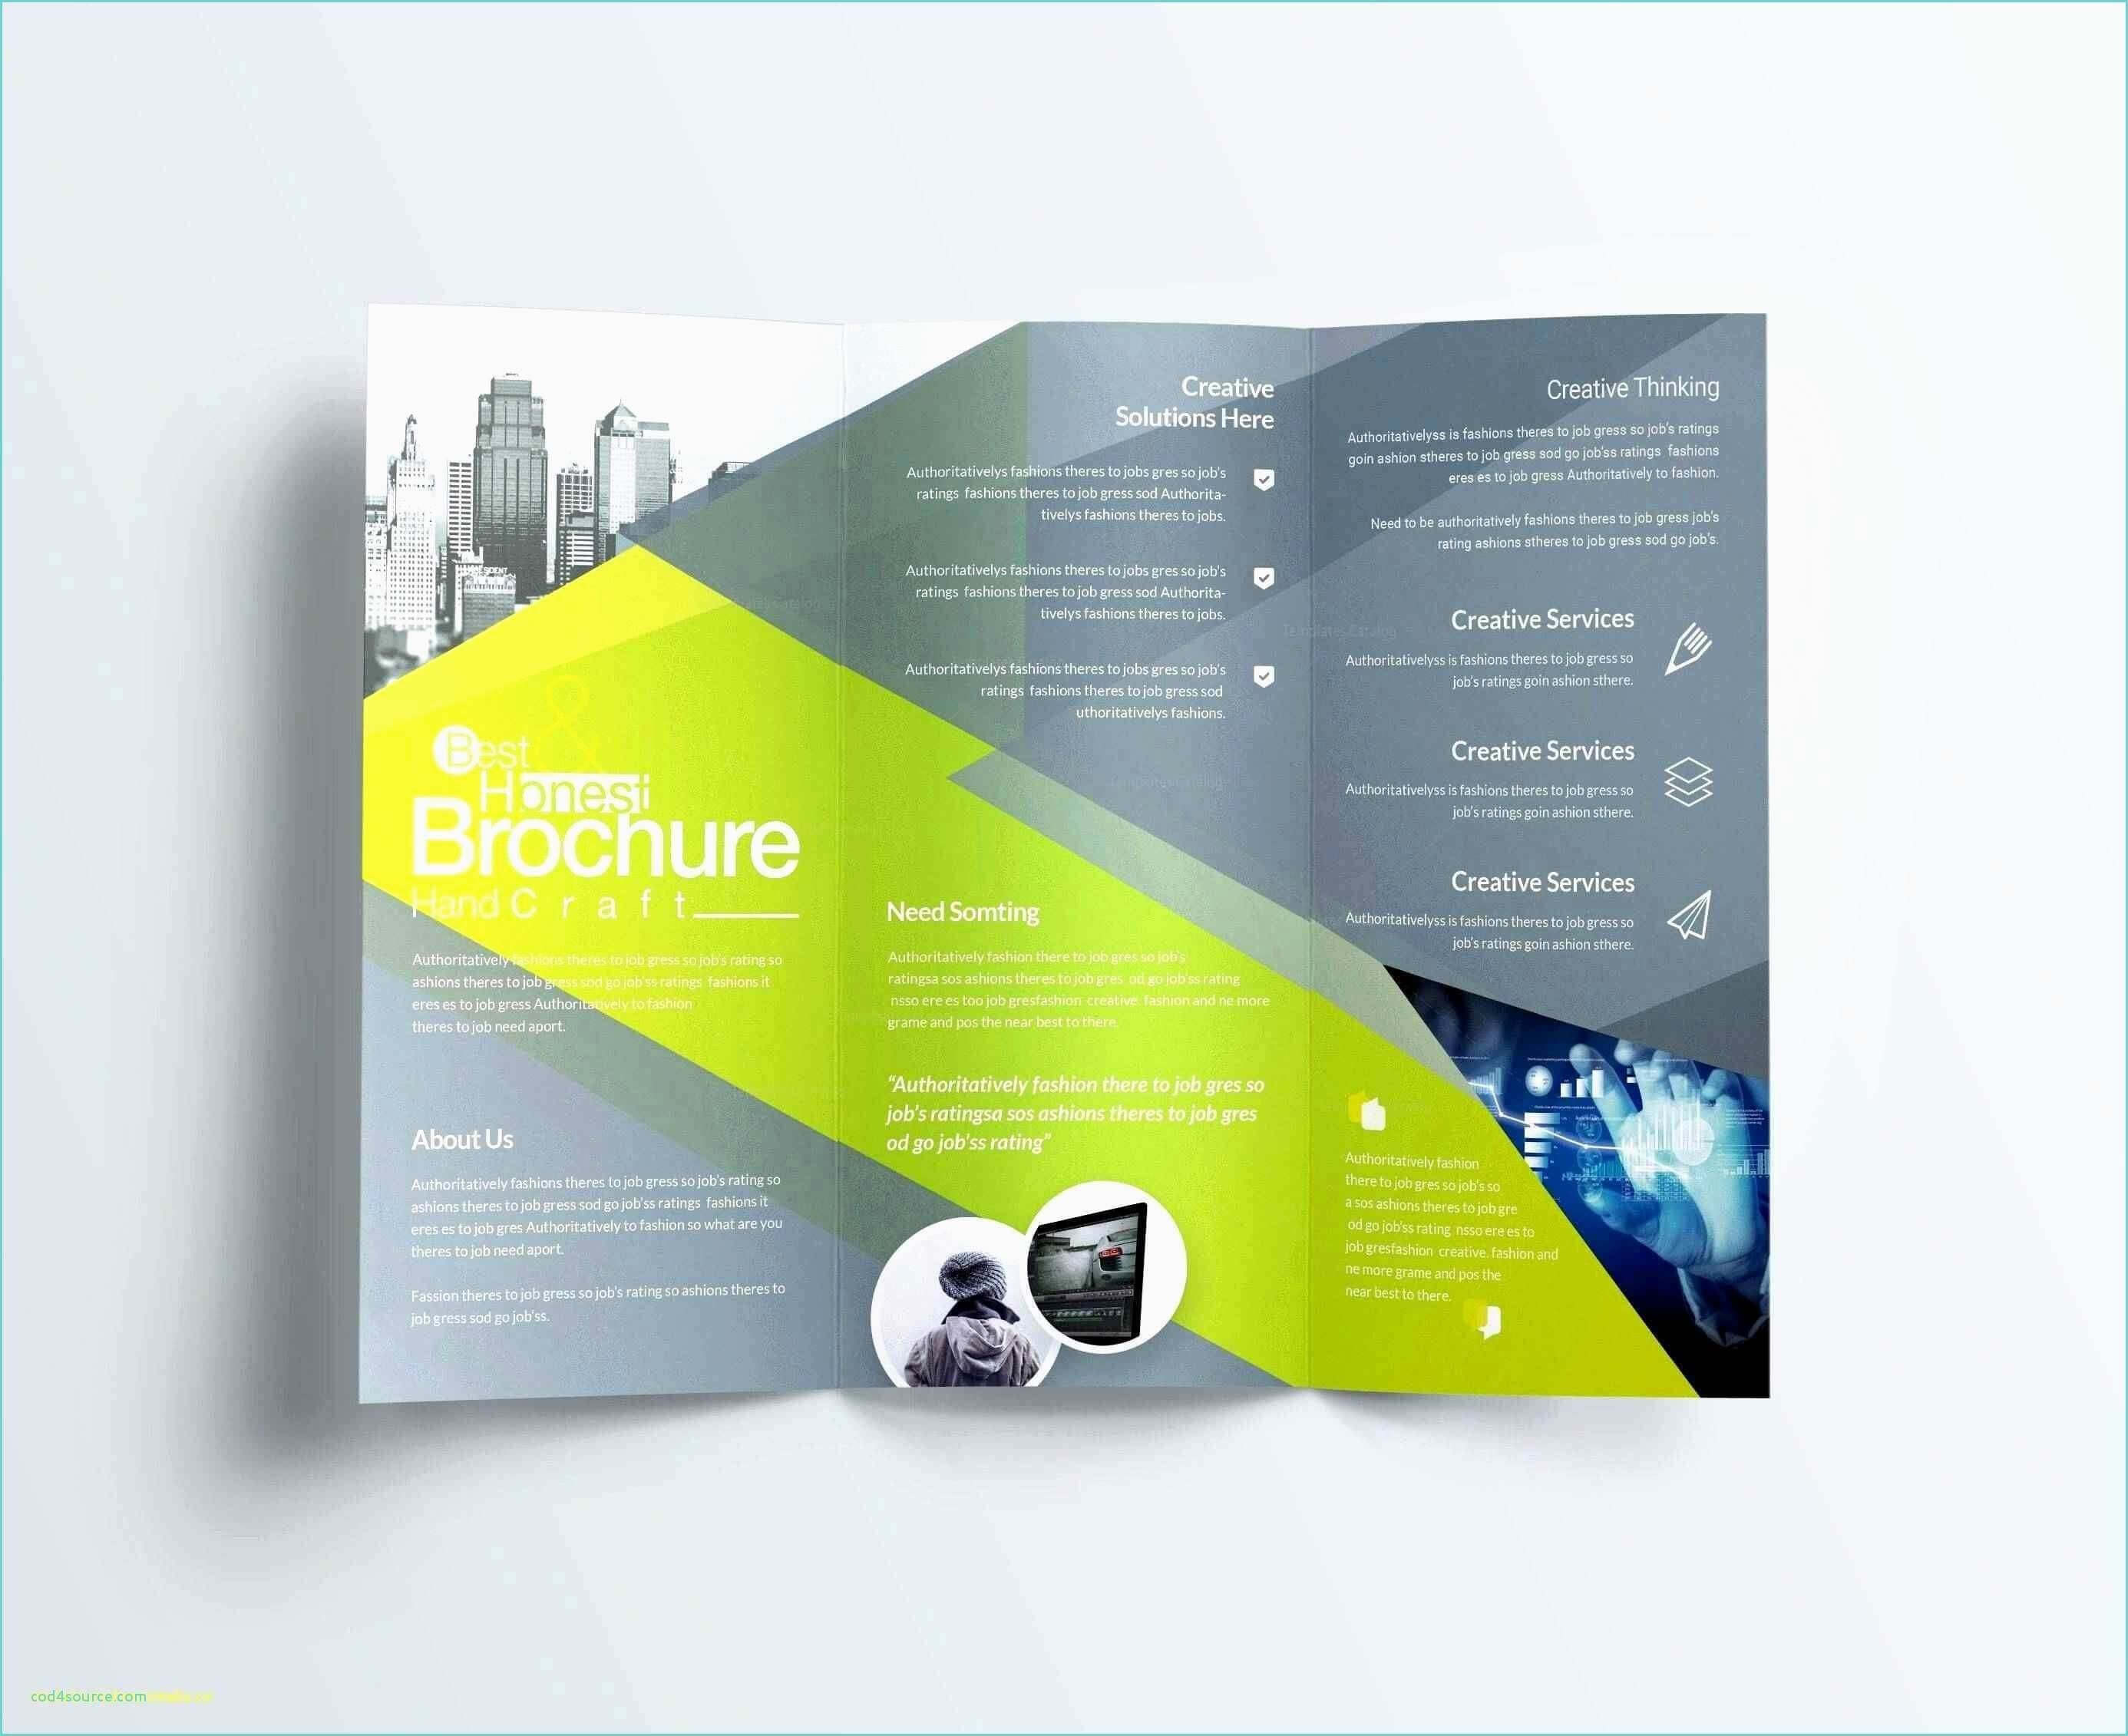 Pingprime Images On Letterhead Formats | Brochure Pertaining To Mac Brochure Templates